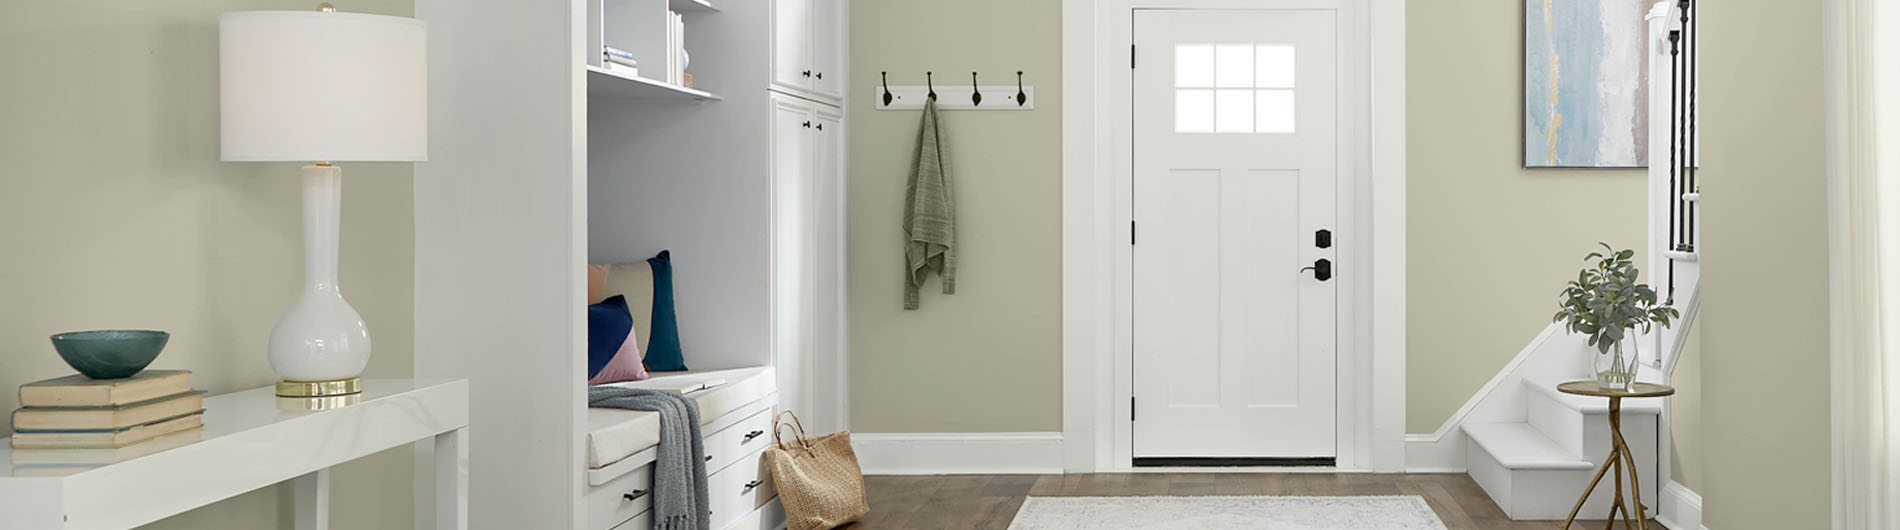 Built-in cabinet with open shelving painting in the color Gratifying Gray.